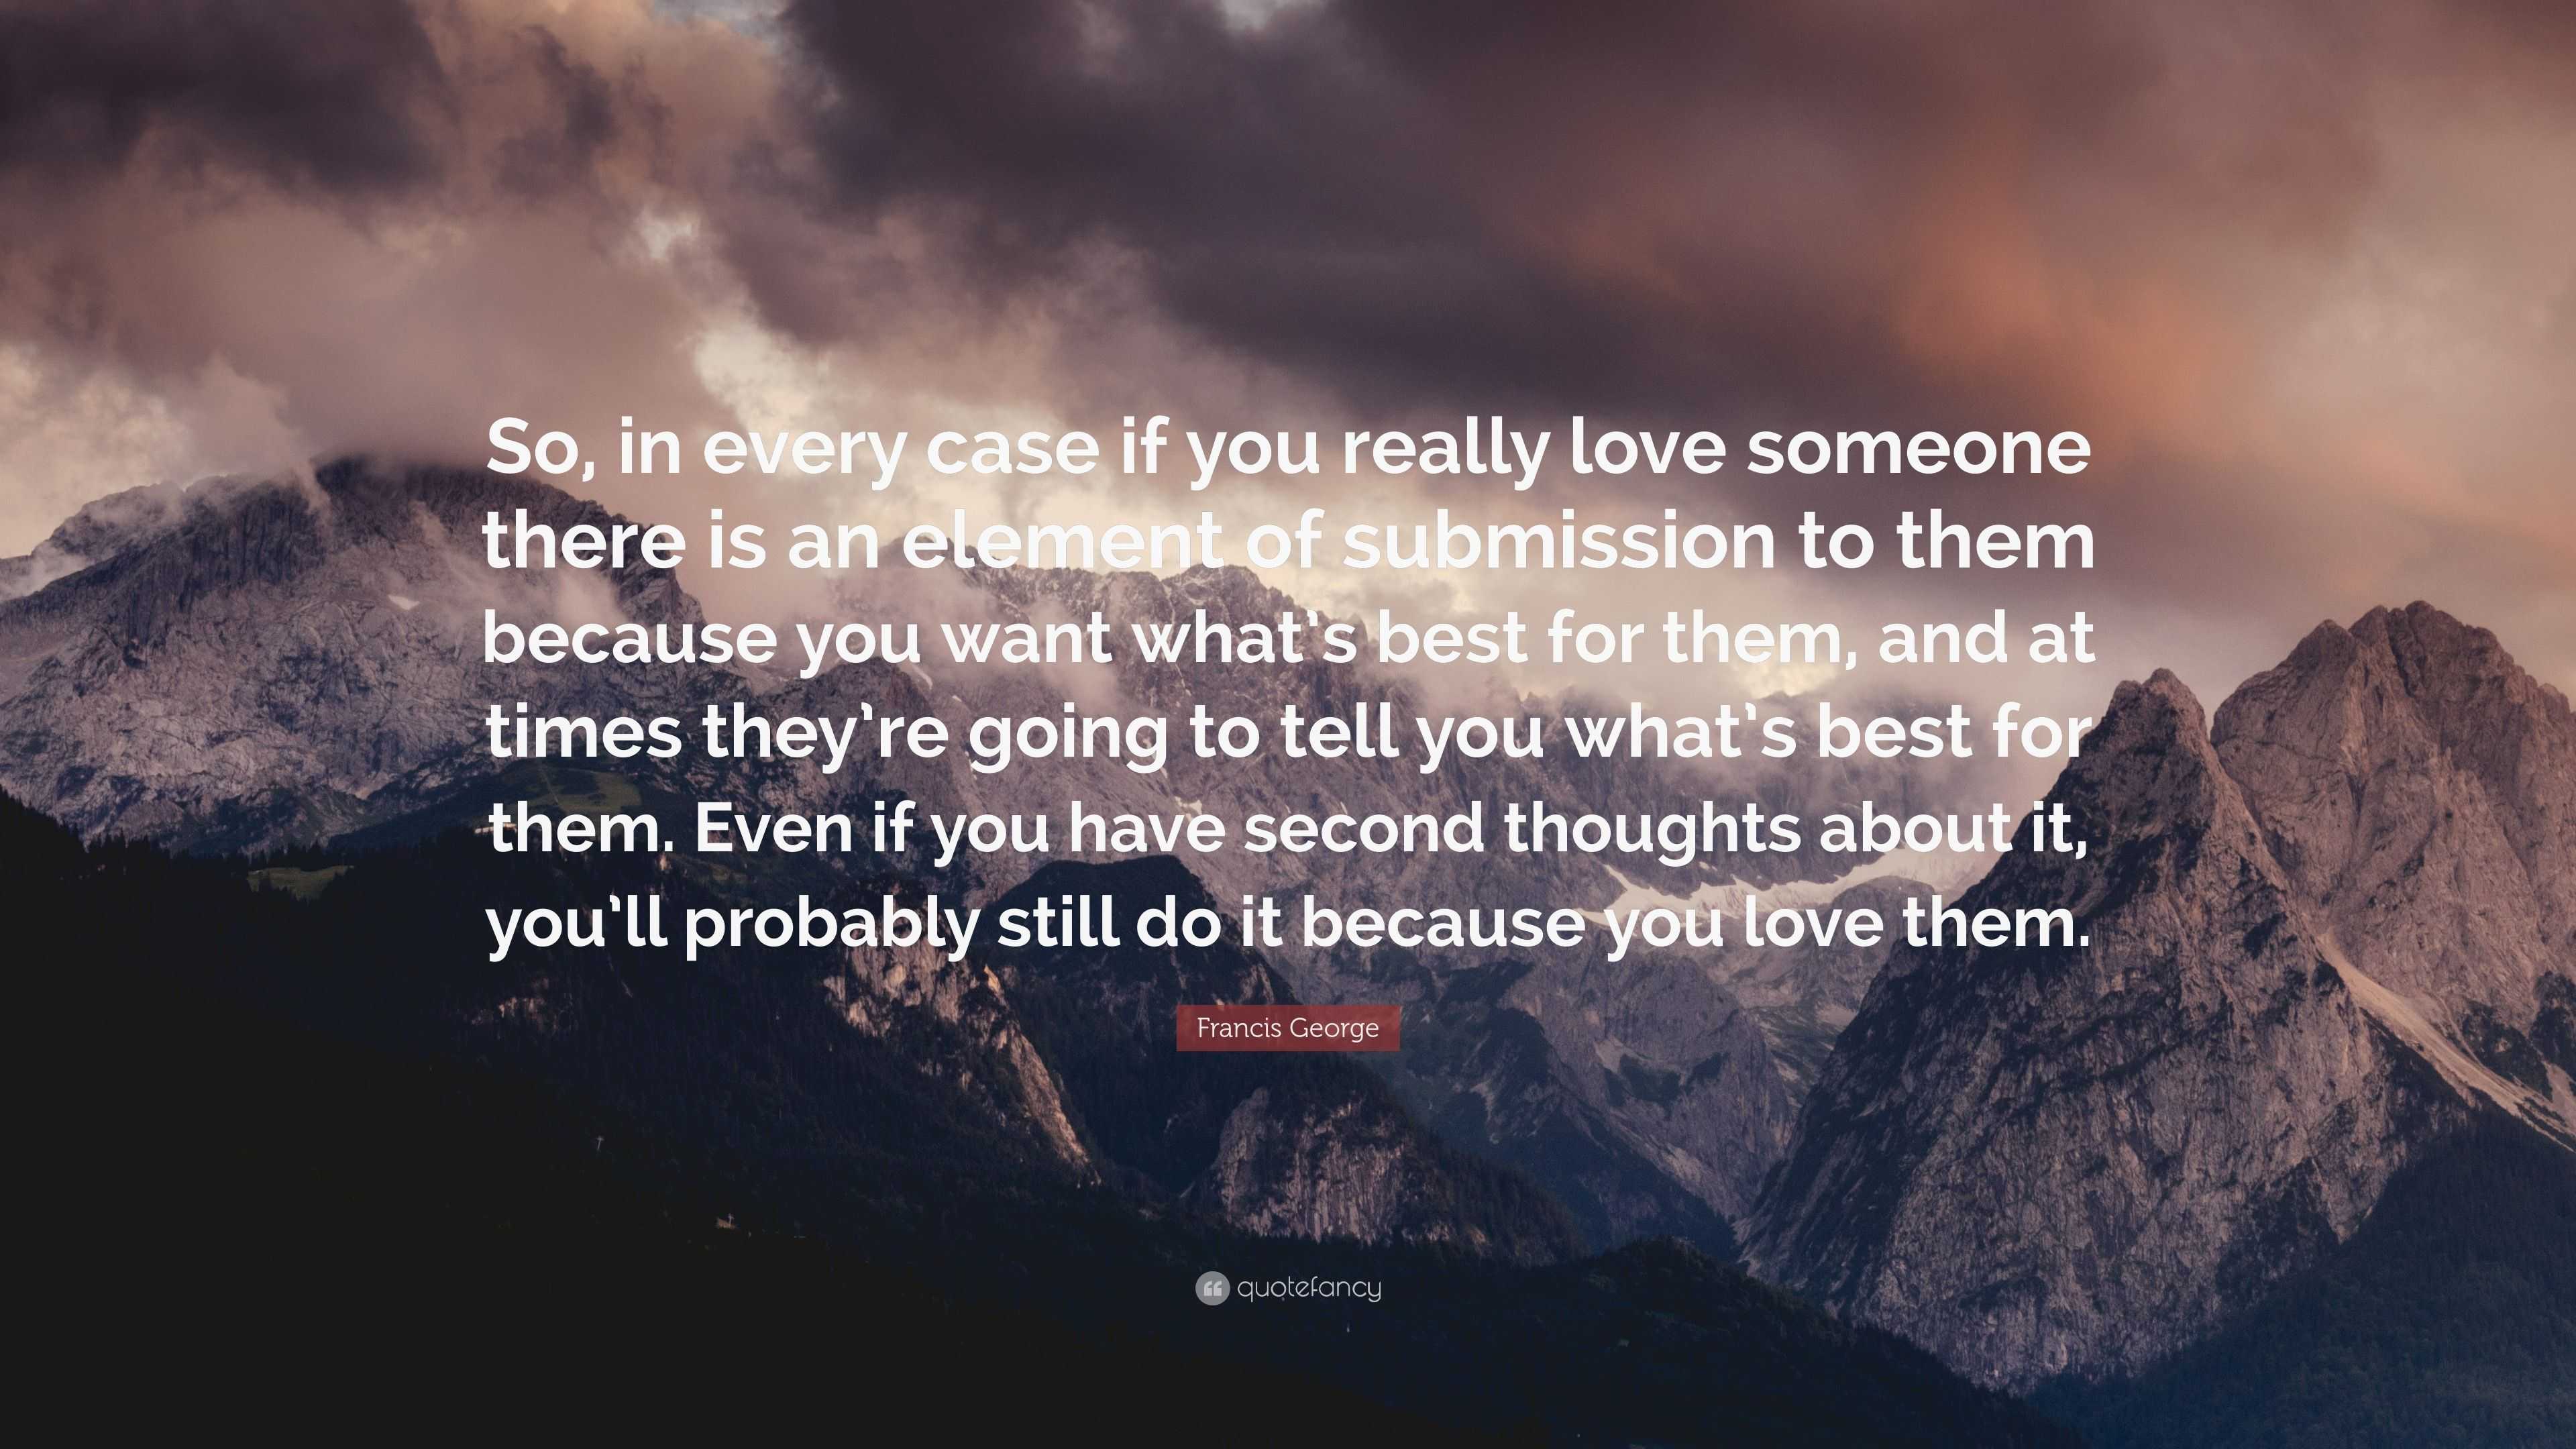 Francis George Quote “So in every case if you really love someone there